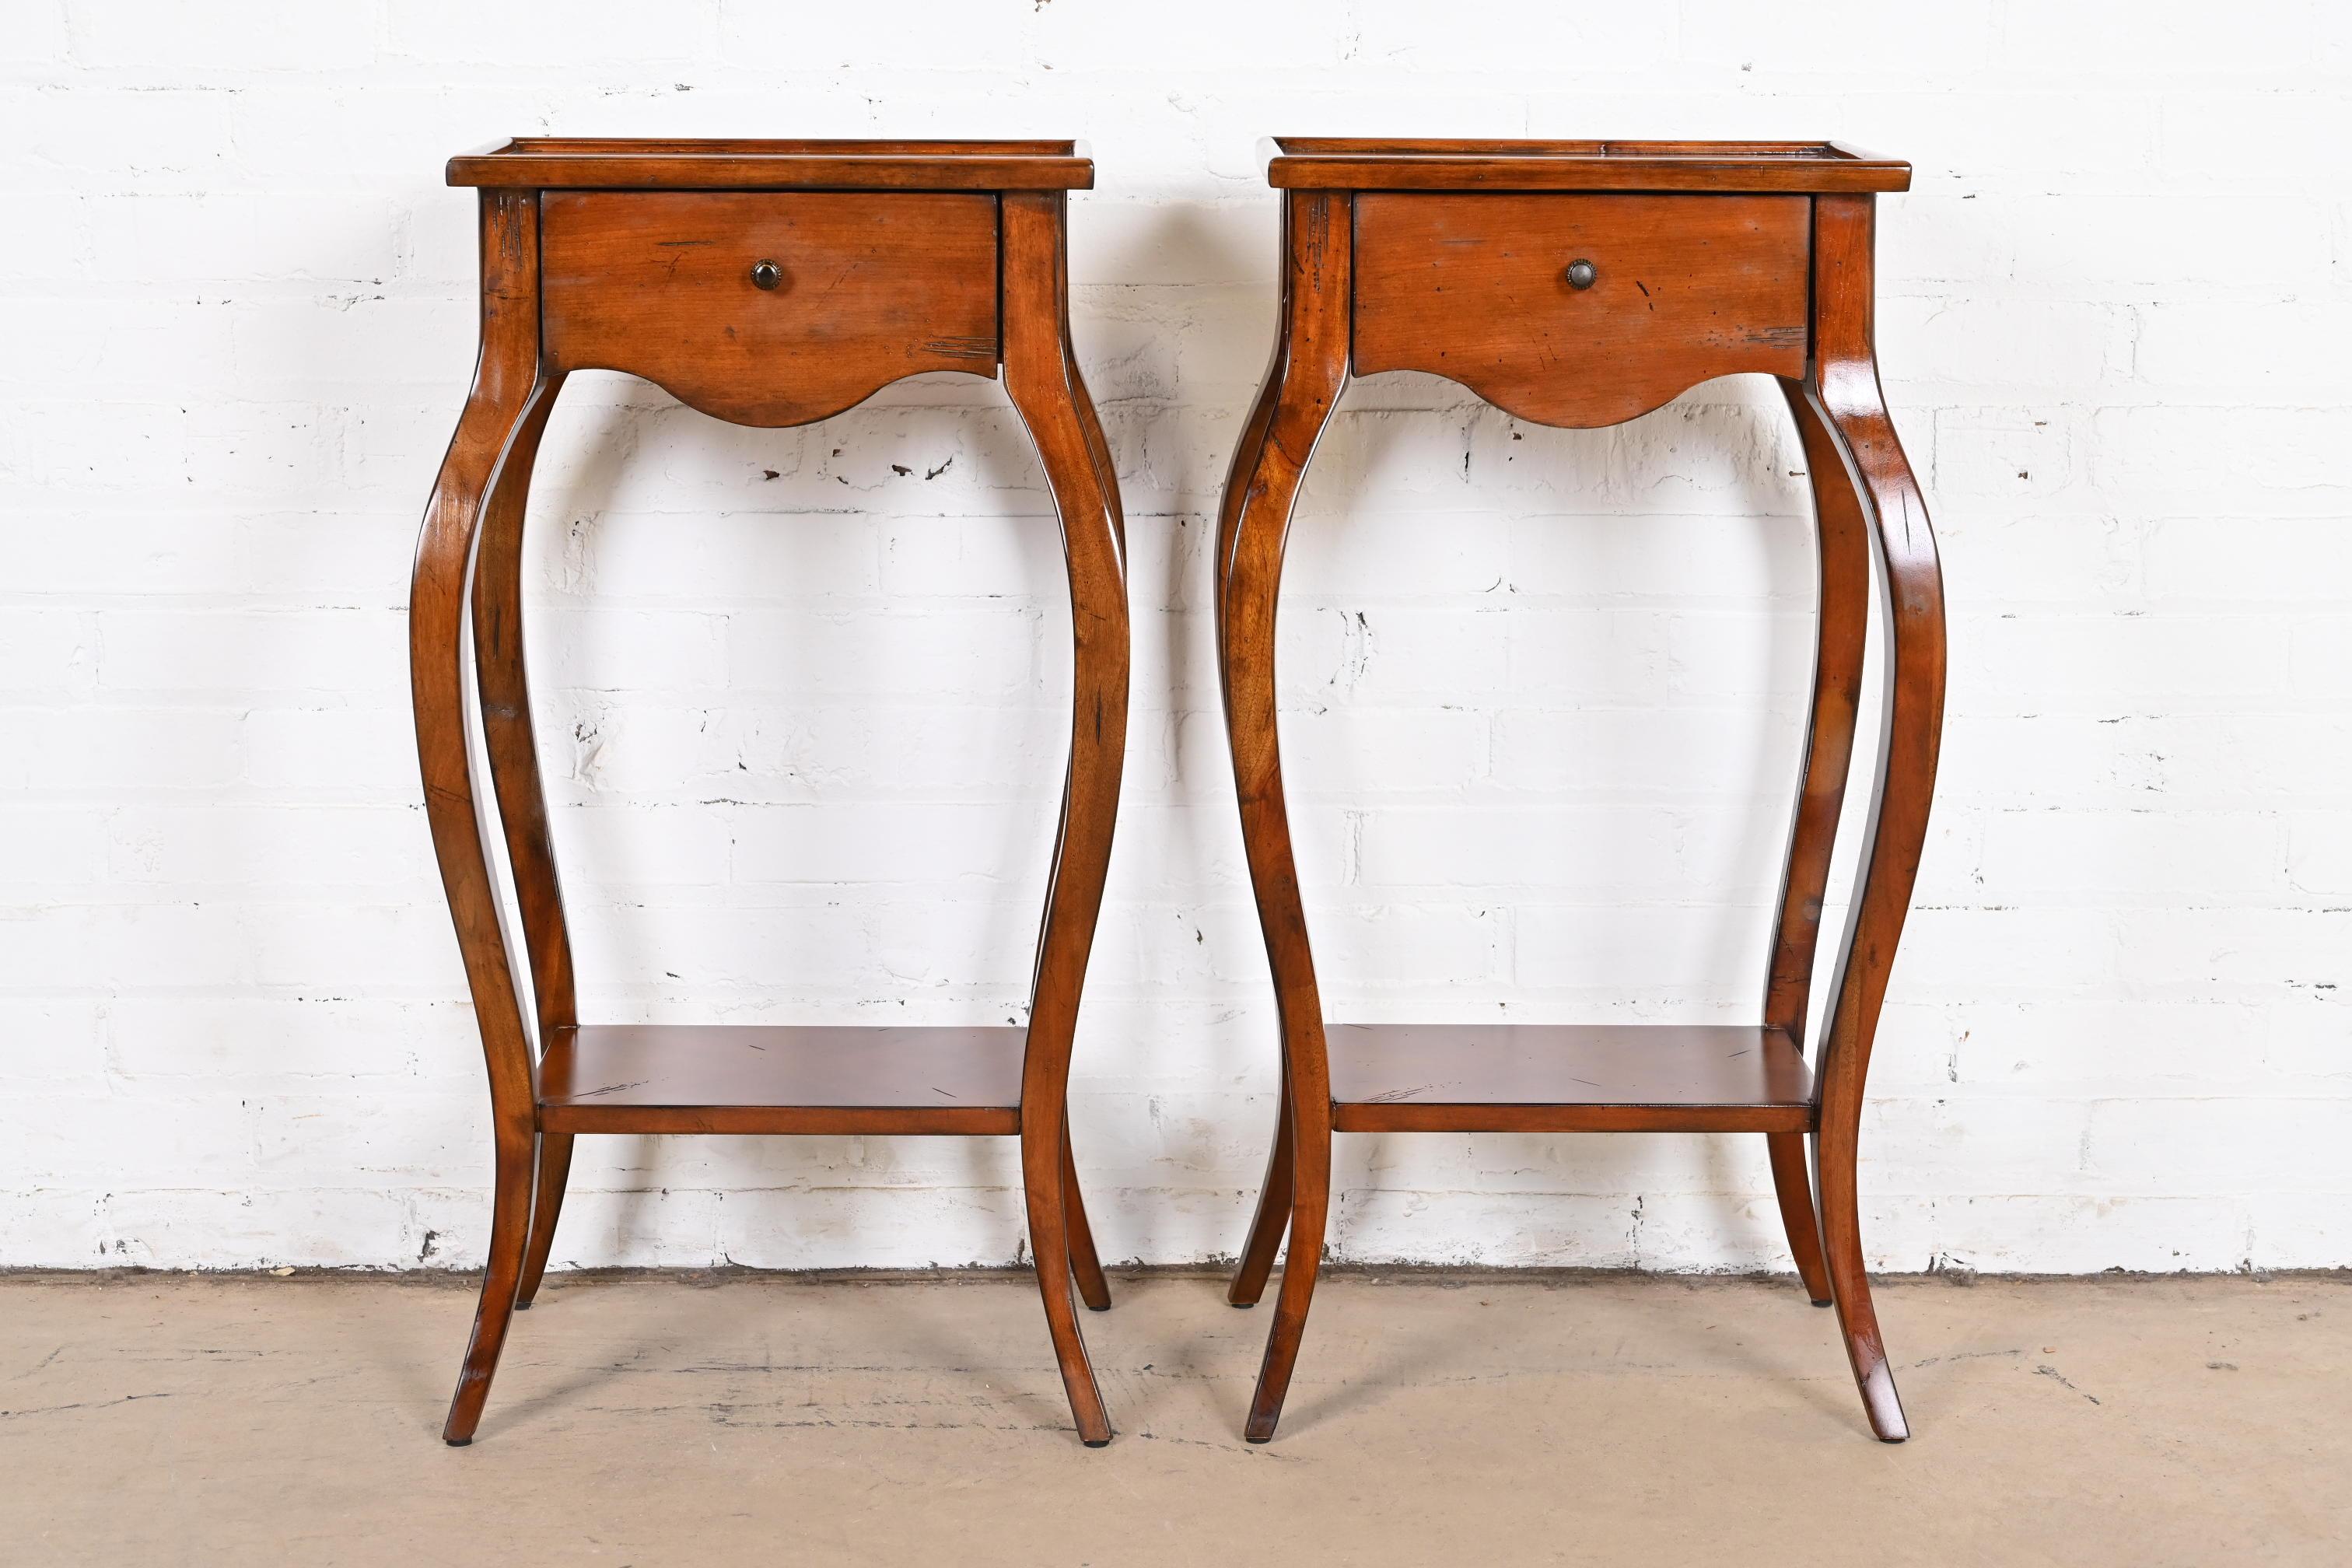 20th Century Hekman French Provincial Cherry Wood Nightstands, Pair